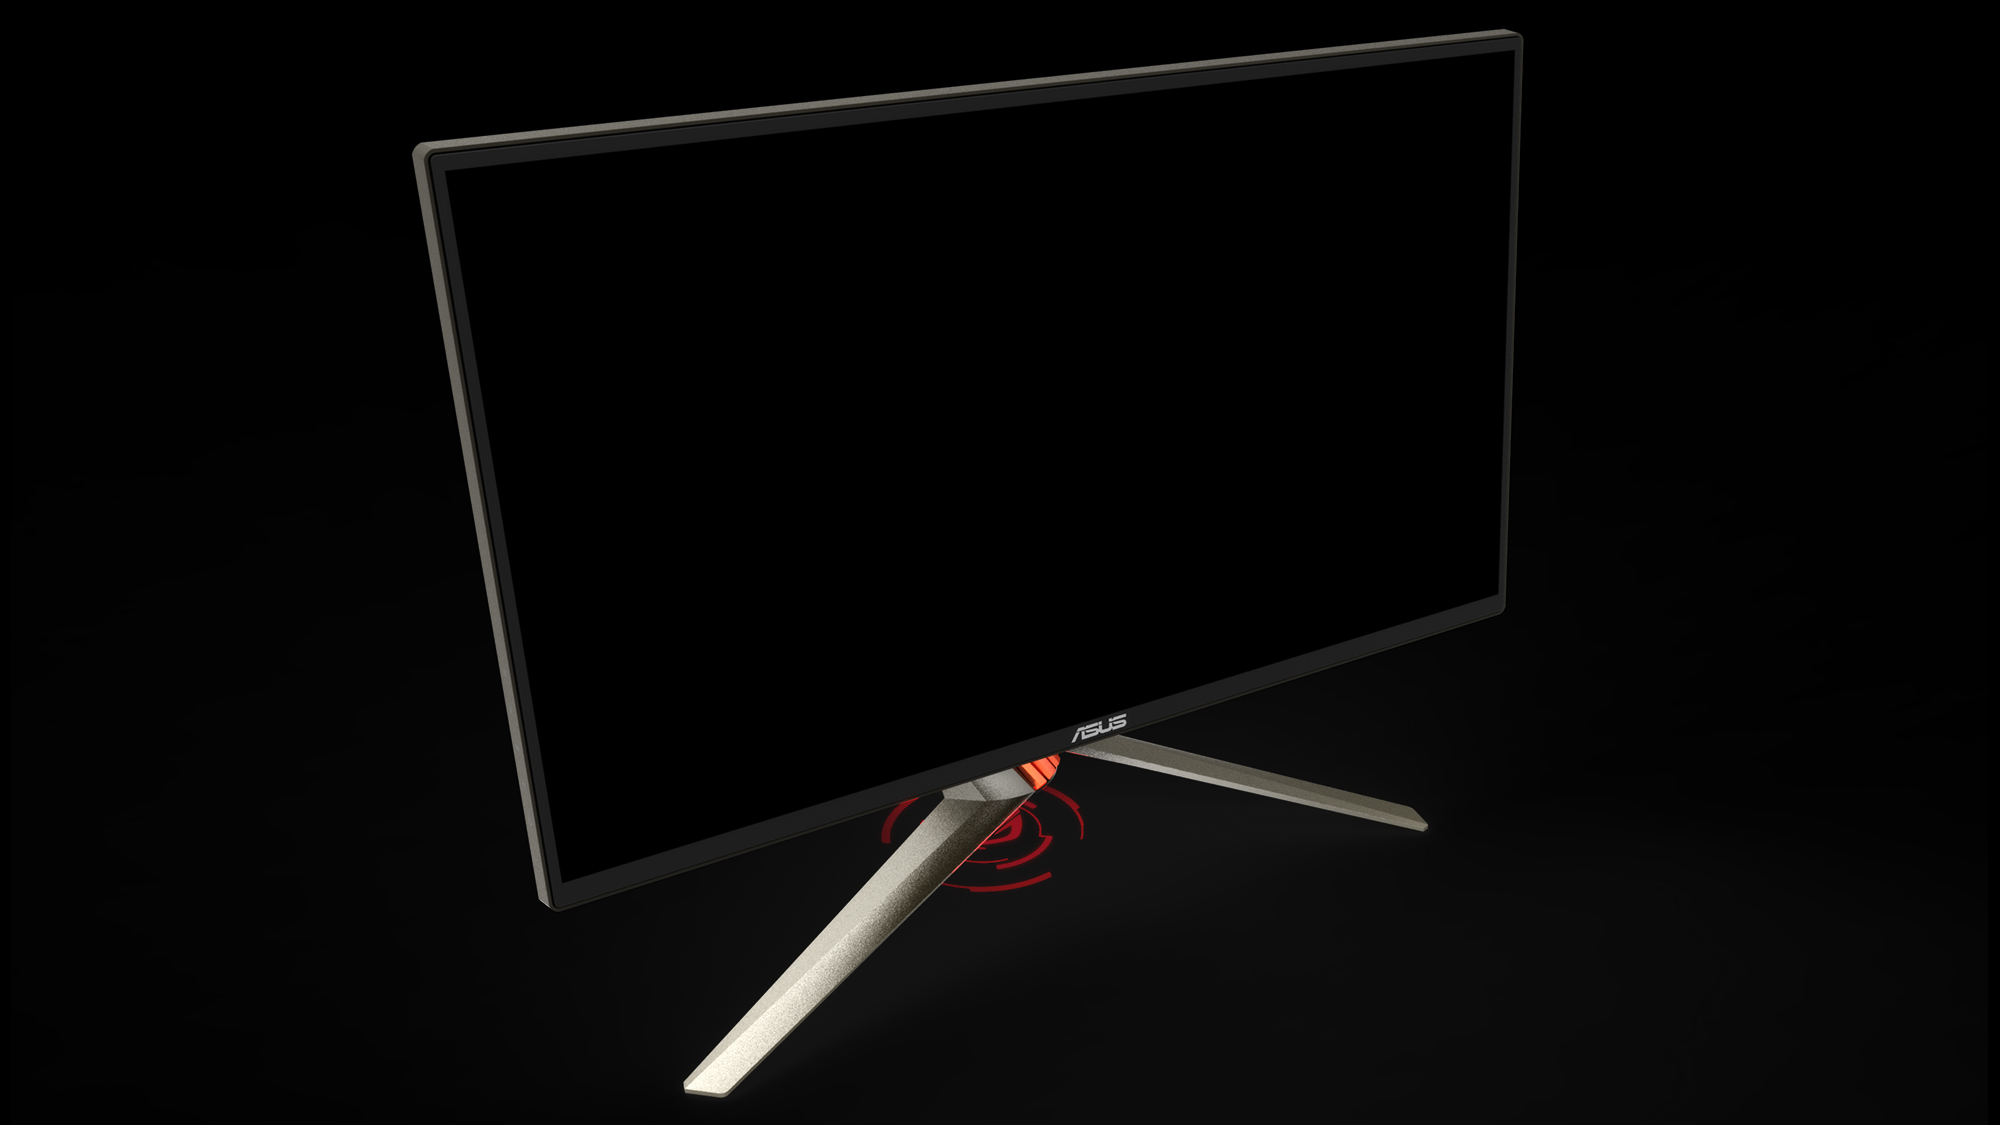 ASUS Teases ROG Swift PG258Q 240Hz Gaming Monitor, Coming Early 2017